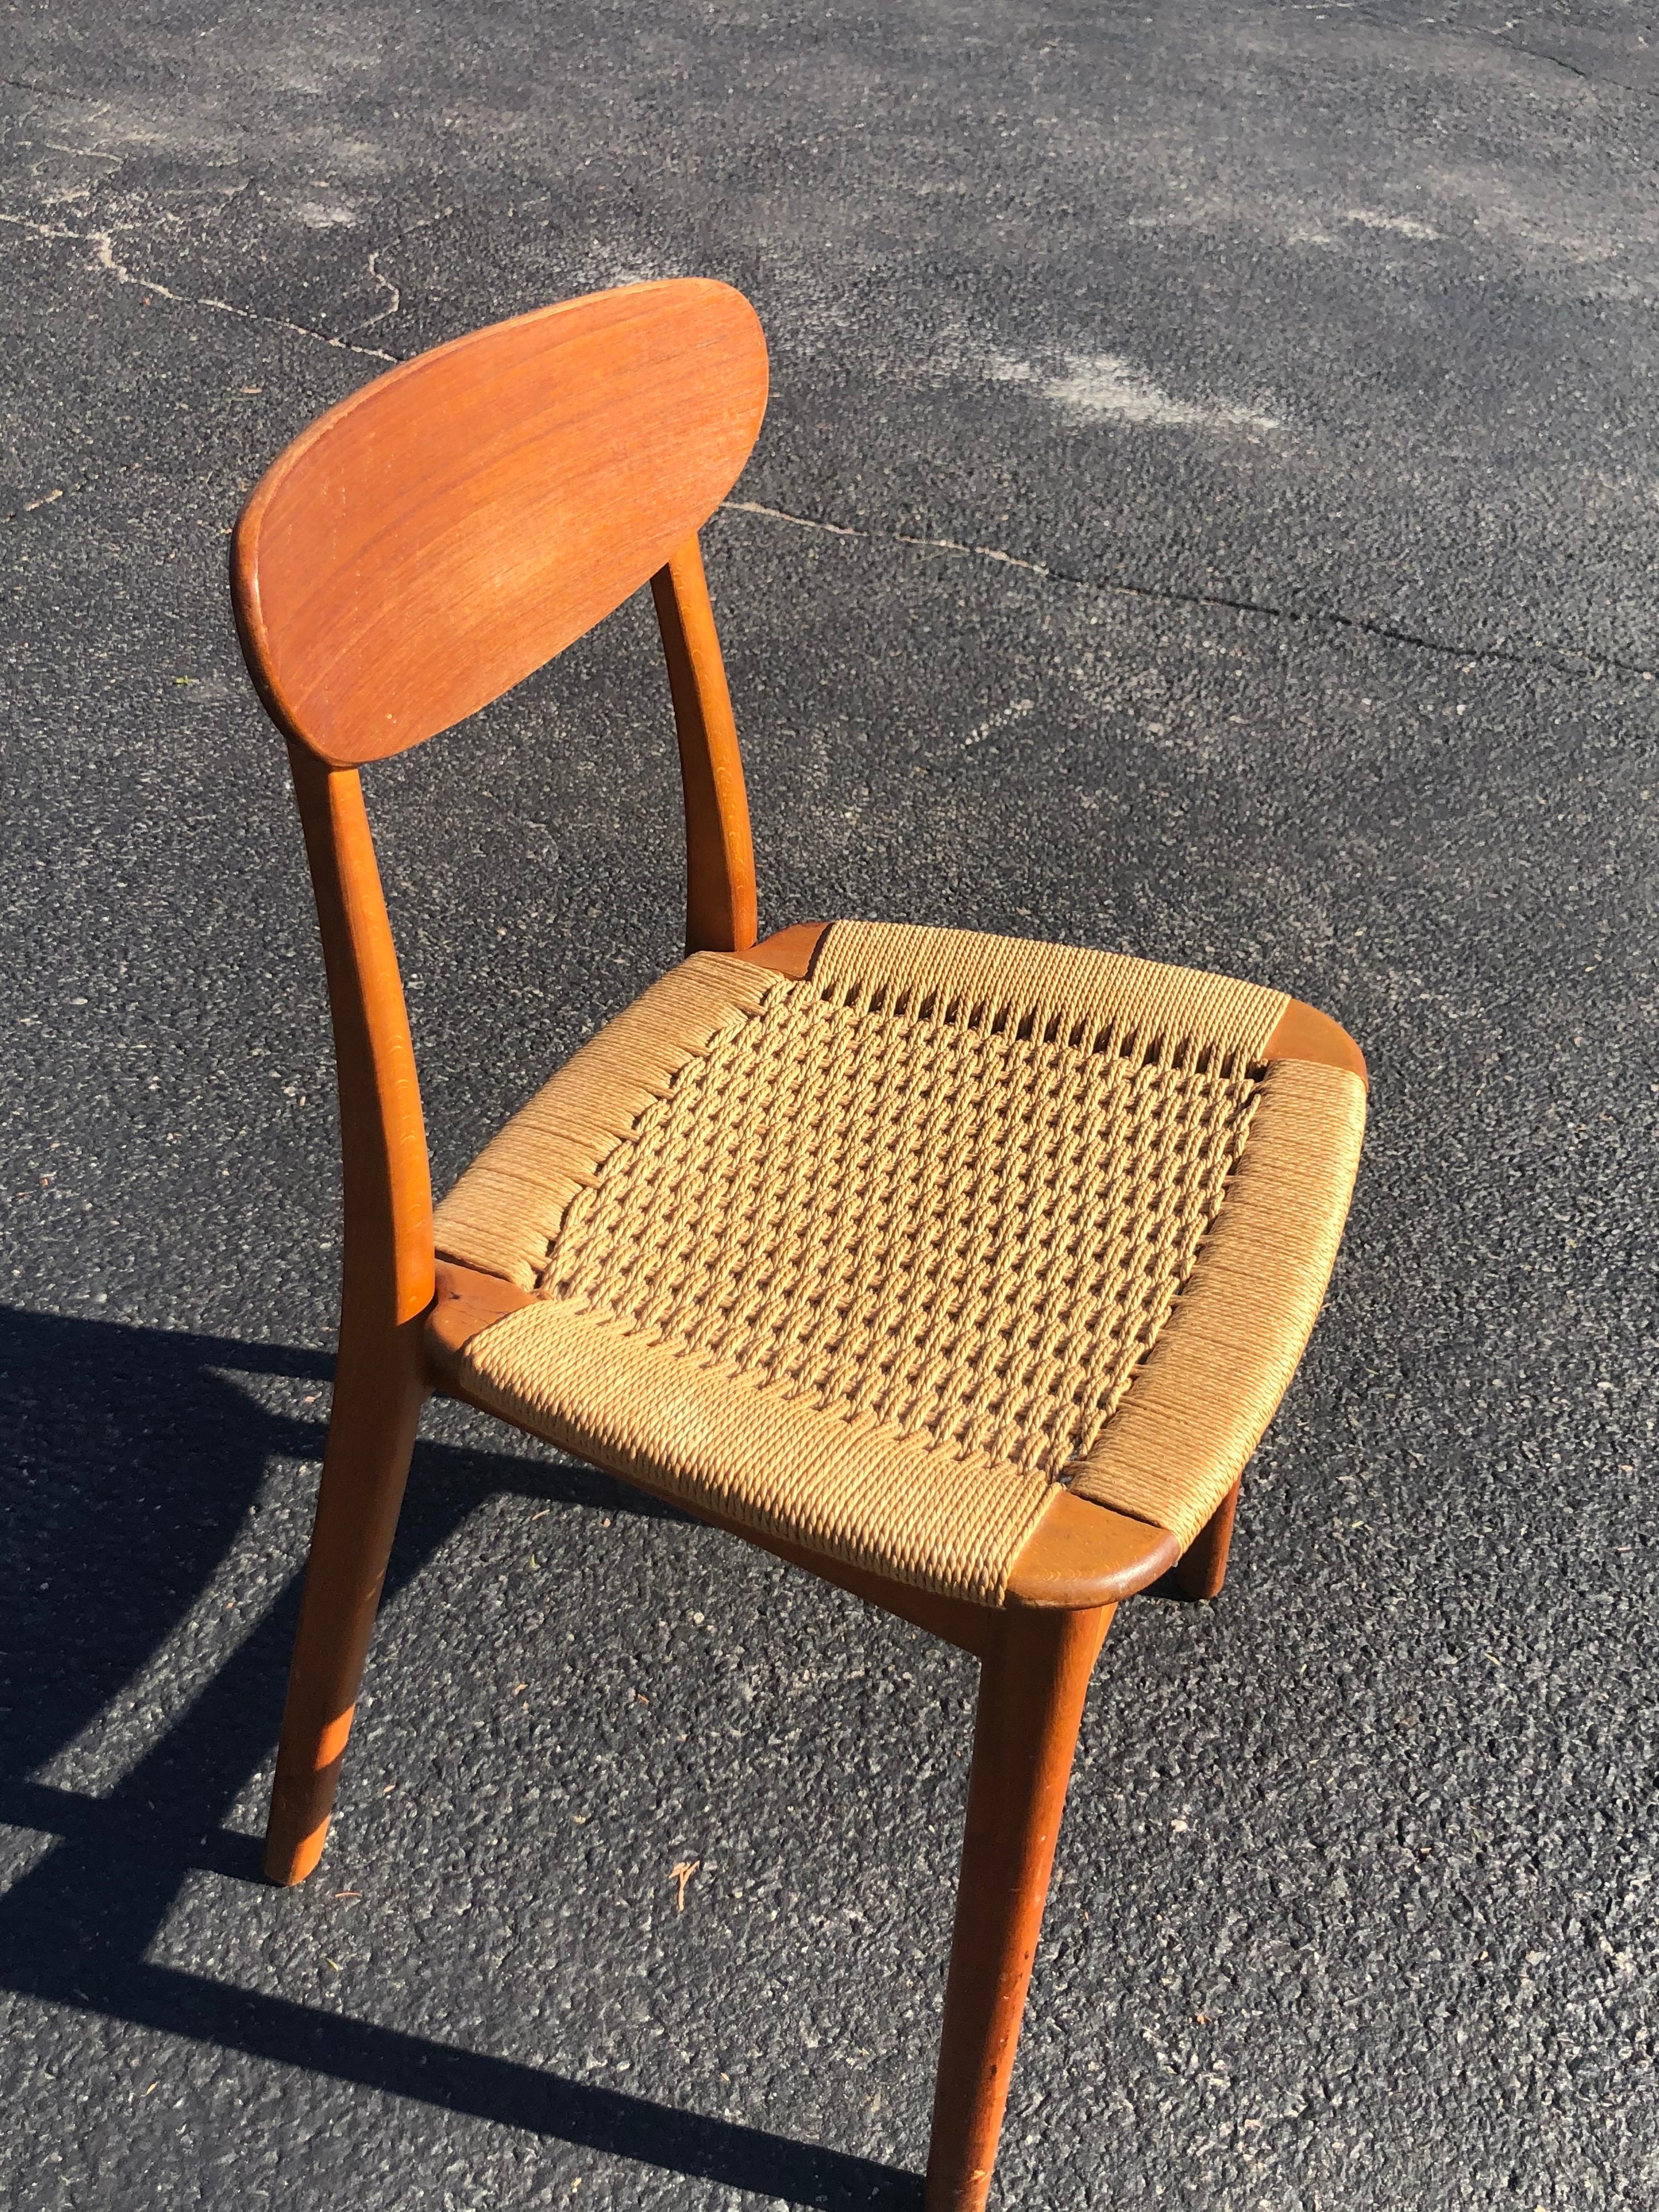 Mid century rope chair with teak wood. In the style of Danish Modern designer Hans Wegner but manufacturedd and imported from Japan in the 1960's.
Seat depth 16in.